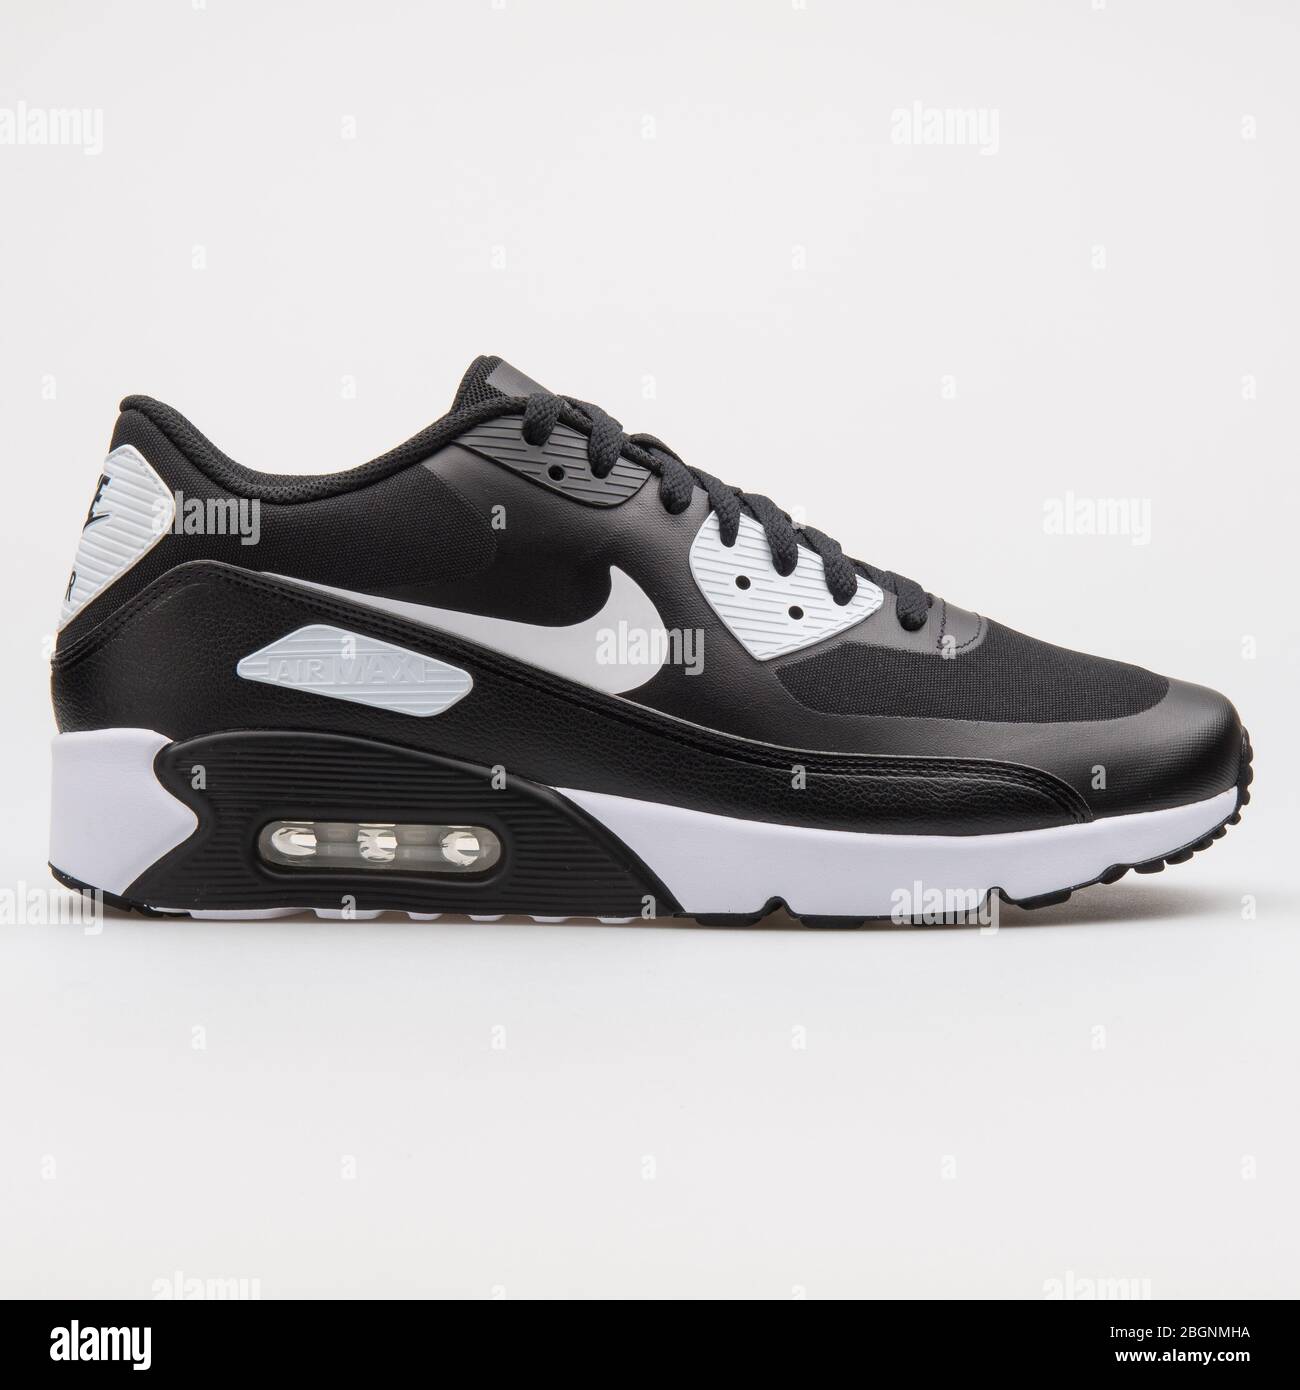 VIENNA, AUSTRIA - AUGUST 14, 2017: Nike Air Max 90 Ultra 2.0 Essential  black and white sneaker on white background Stock Photo - Alamy